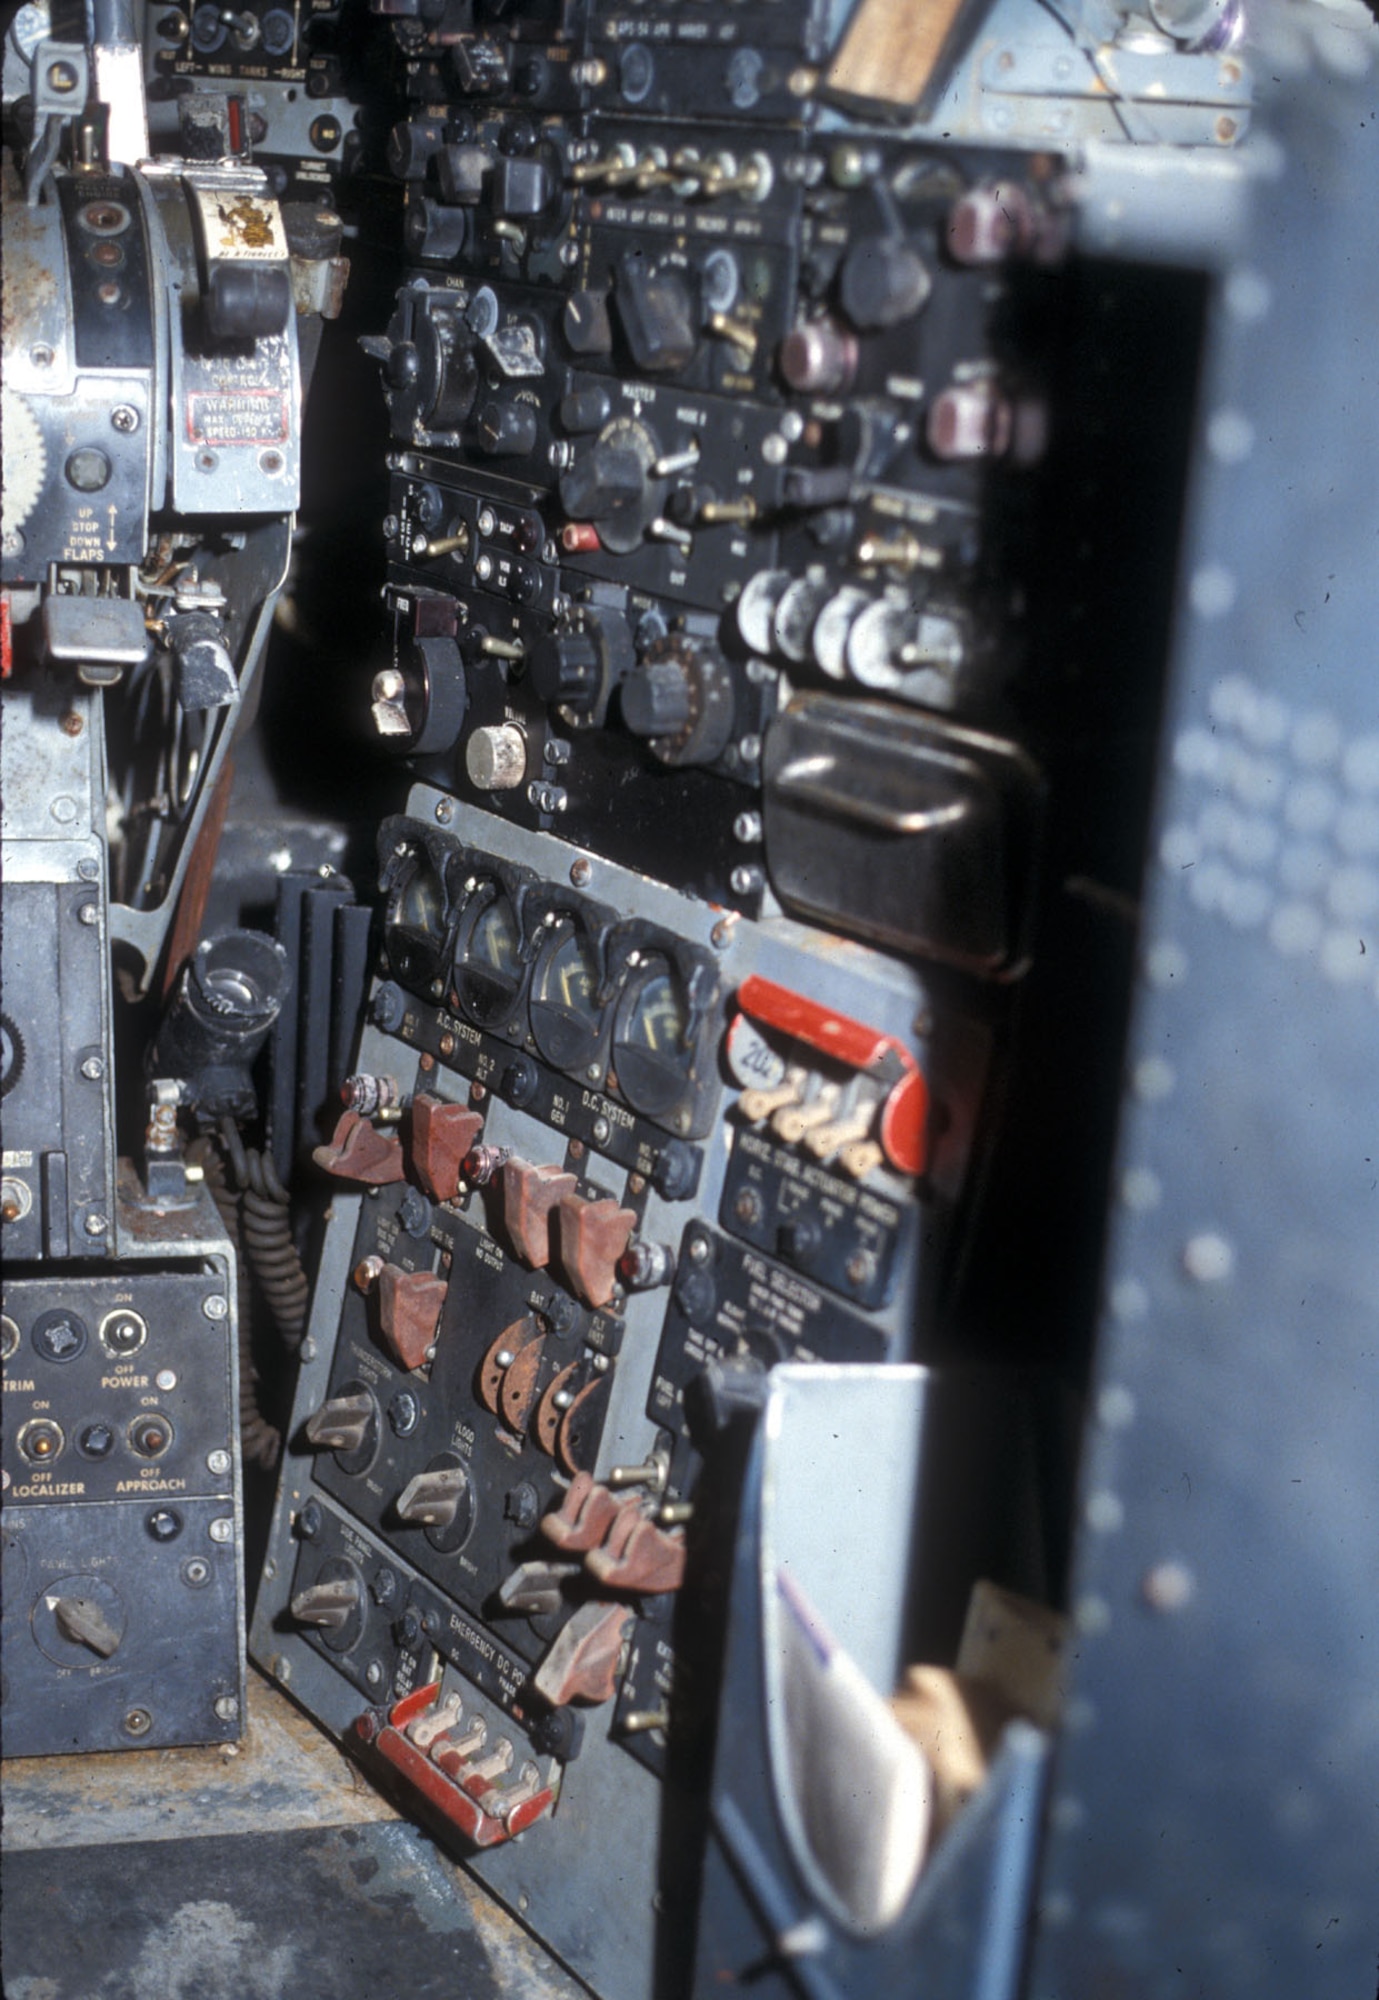 DAYTON, Ohio -- Douglas RB-66B cockpit at the National Museum of the United States Air Force. (U.S. Air Force photo)